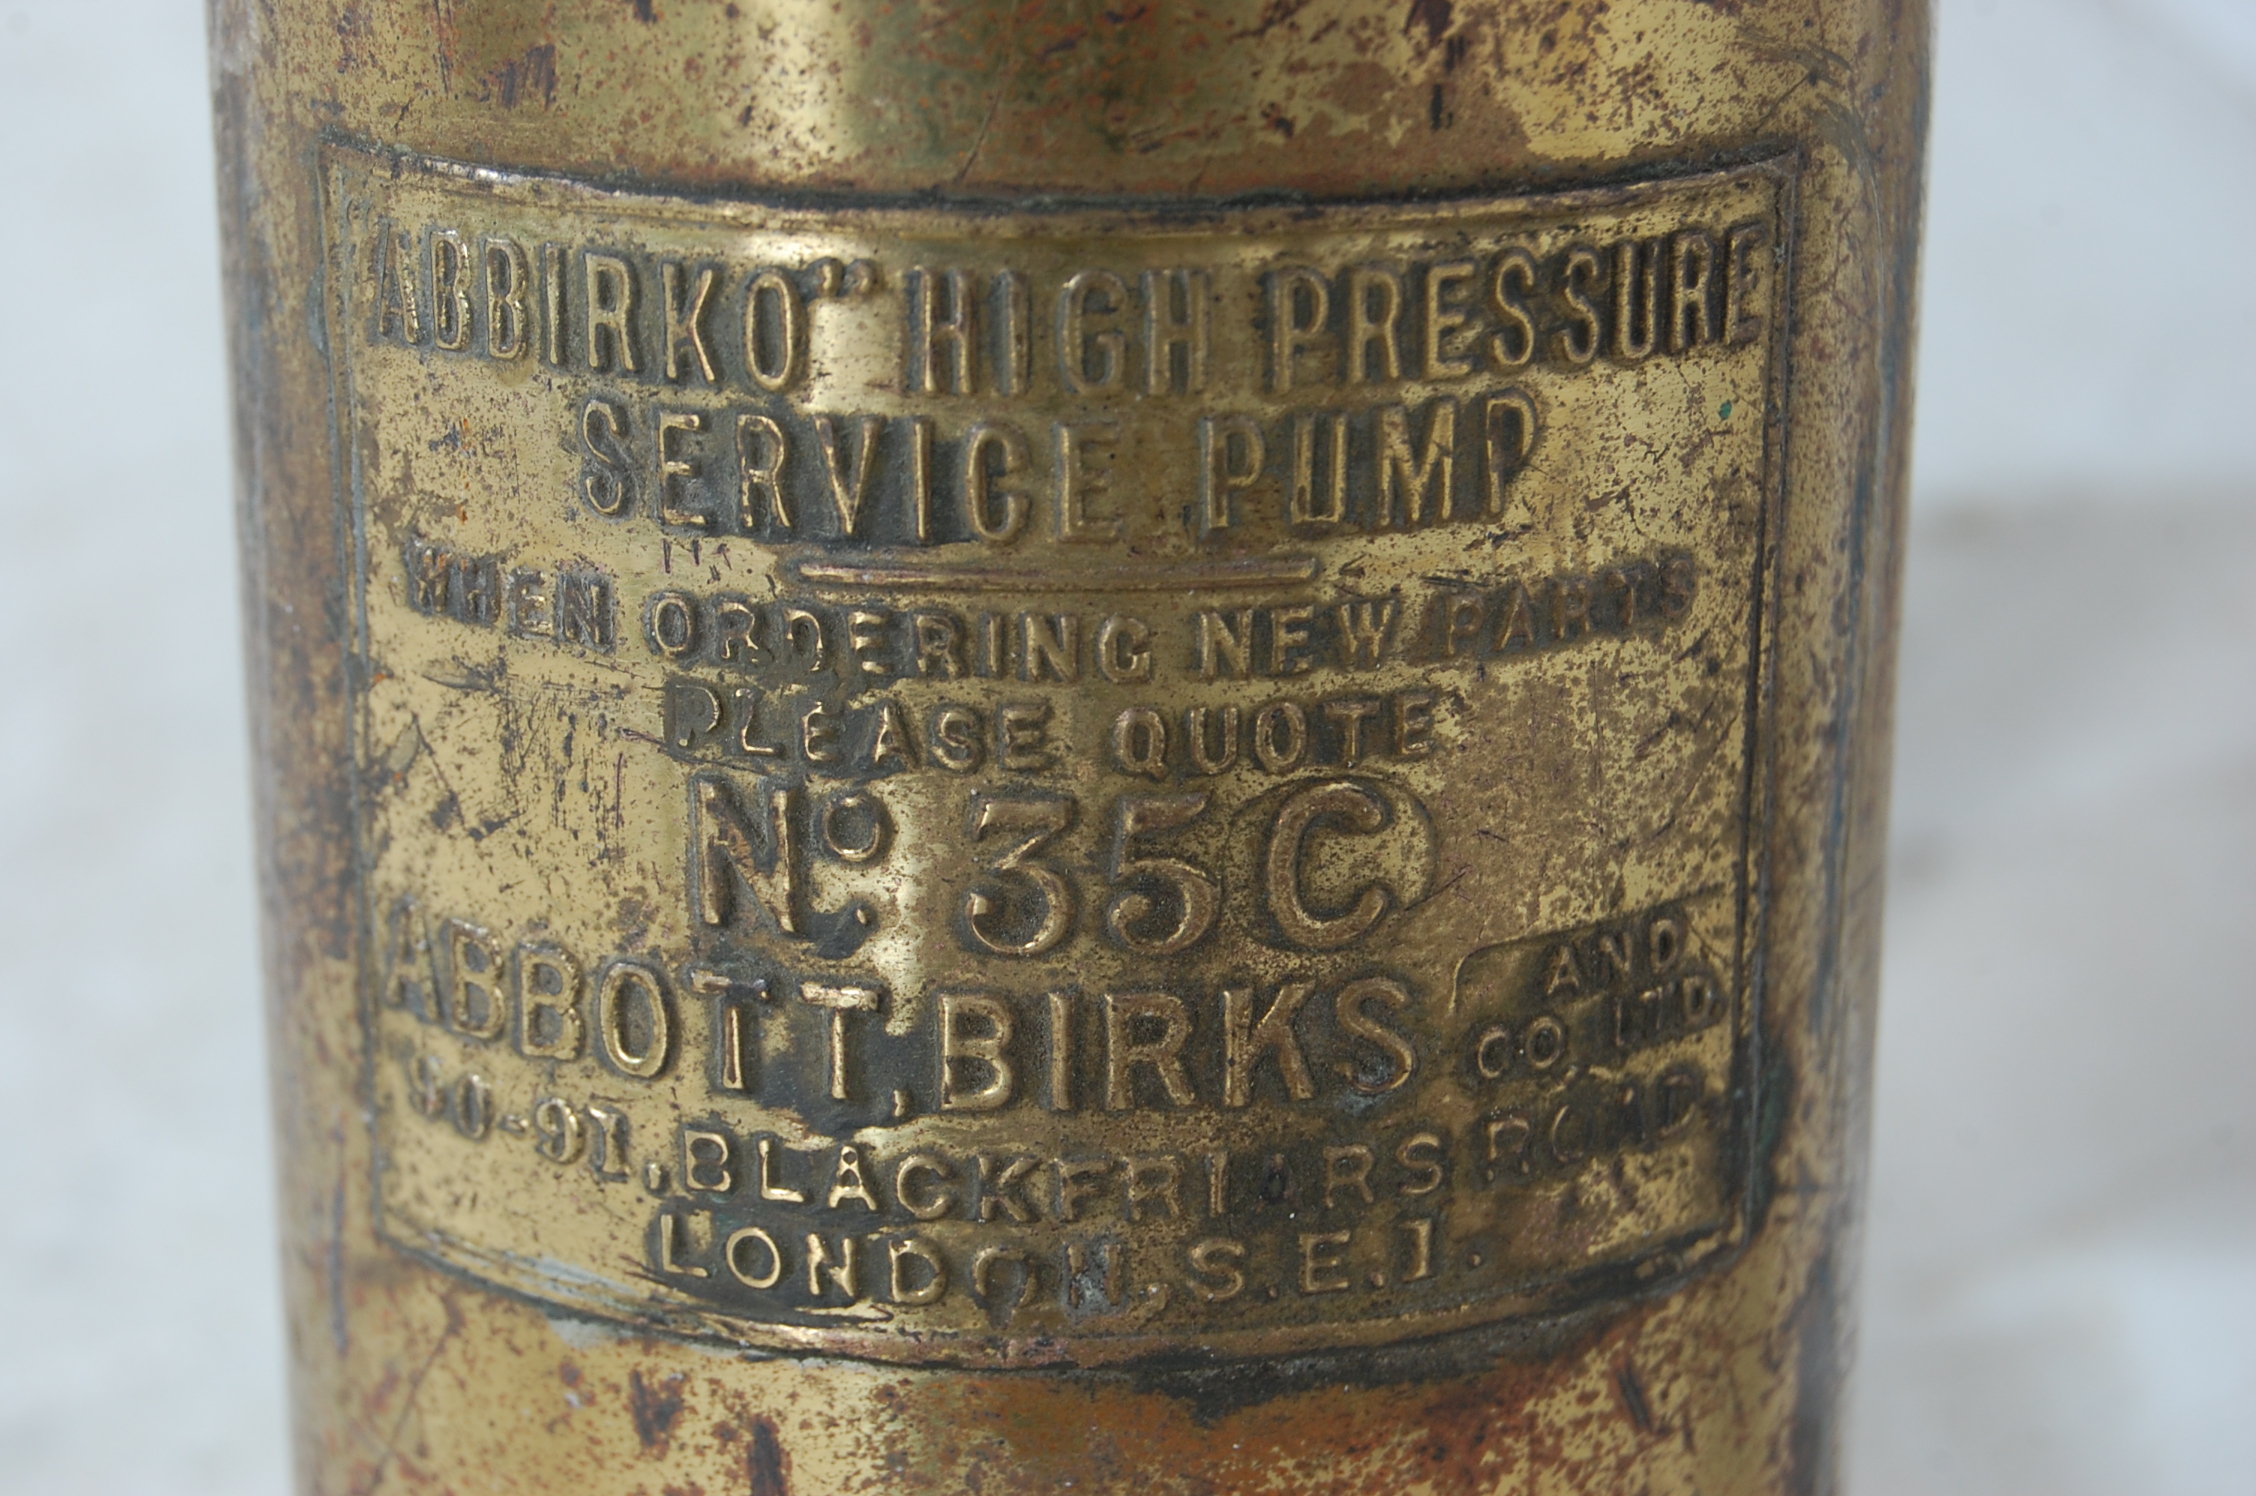 ABBIRKO PRESSURE SERVICE PUMP AND ANOTHER - Image 4 of 6